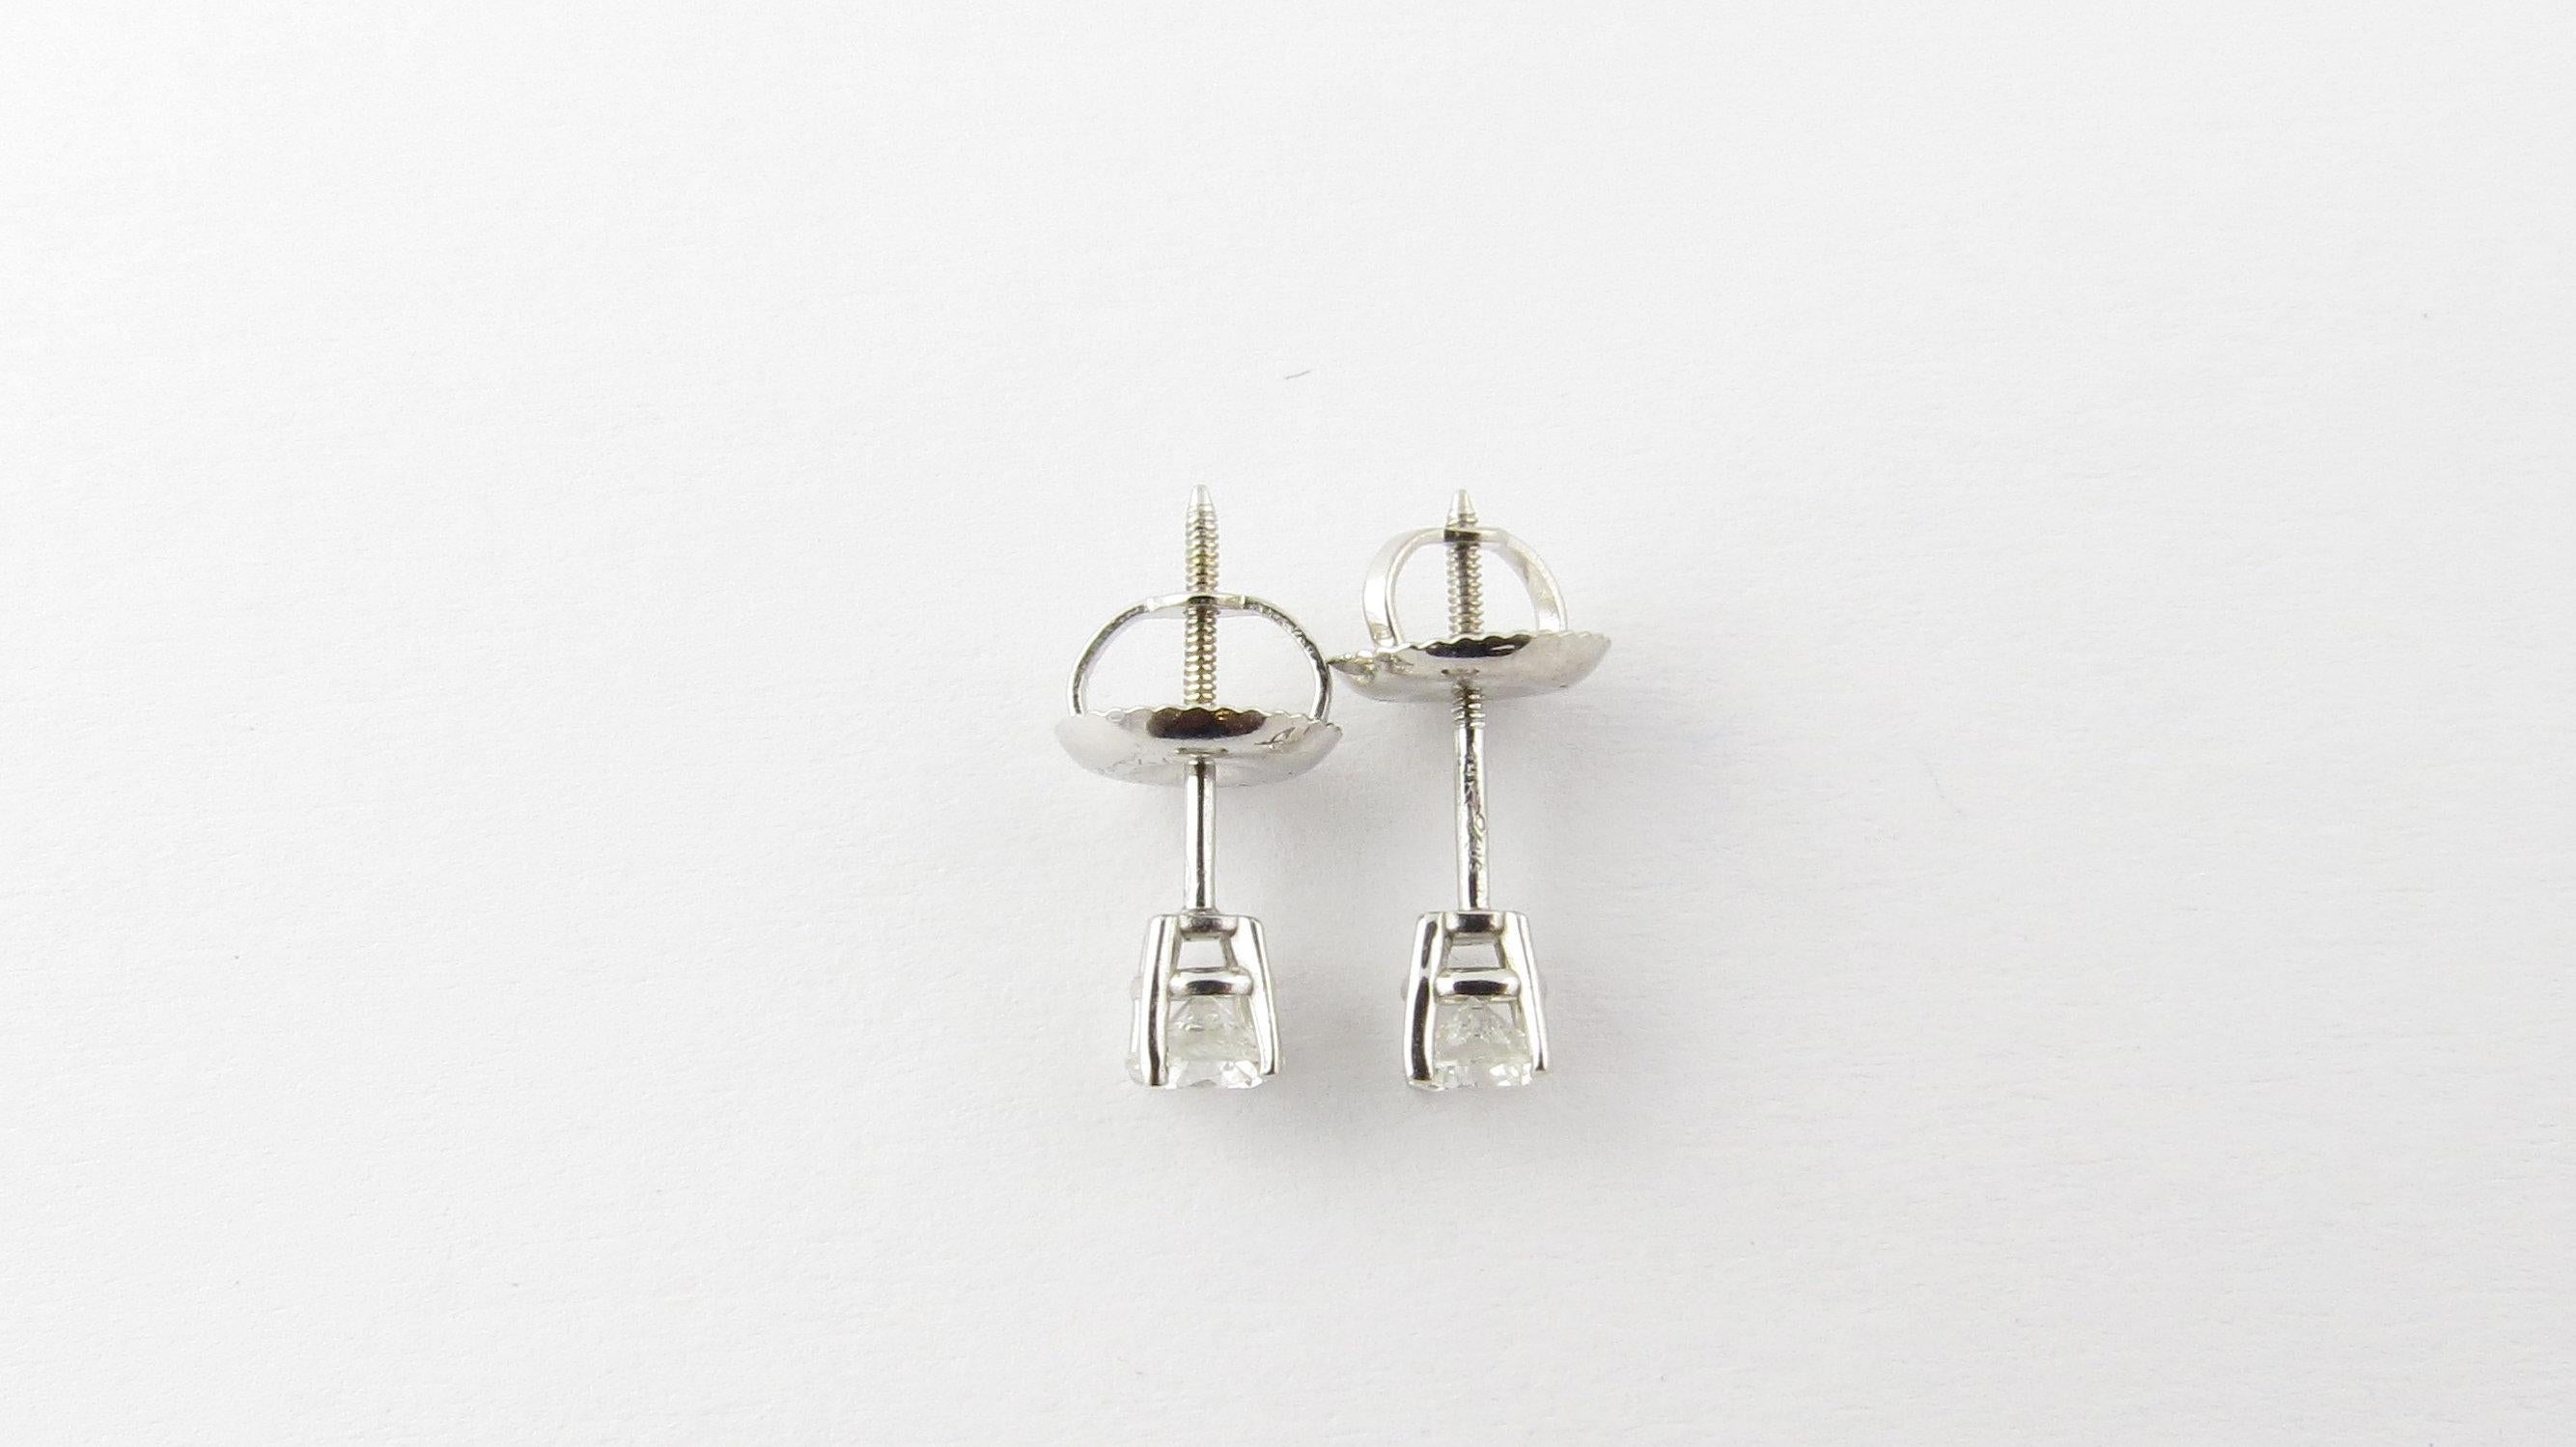 Vintage 14 Karat White Gold Diamond Stud Earrings .30 ct. twt.- 
These sparkling stud earrings each feature one round brilliant cut diamond (.15 ct.) set in classic 14K white gold. Screw back closures. 
Approximate total diamond weight: .30 ct.